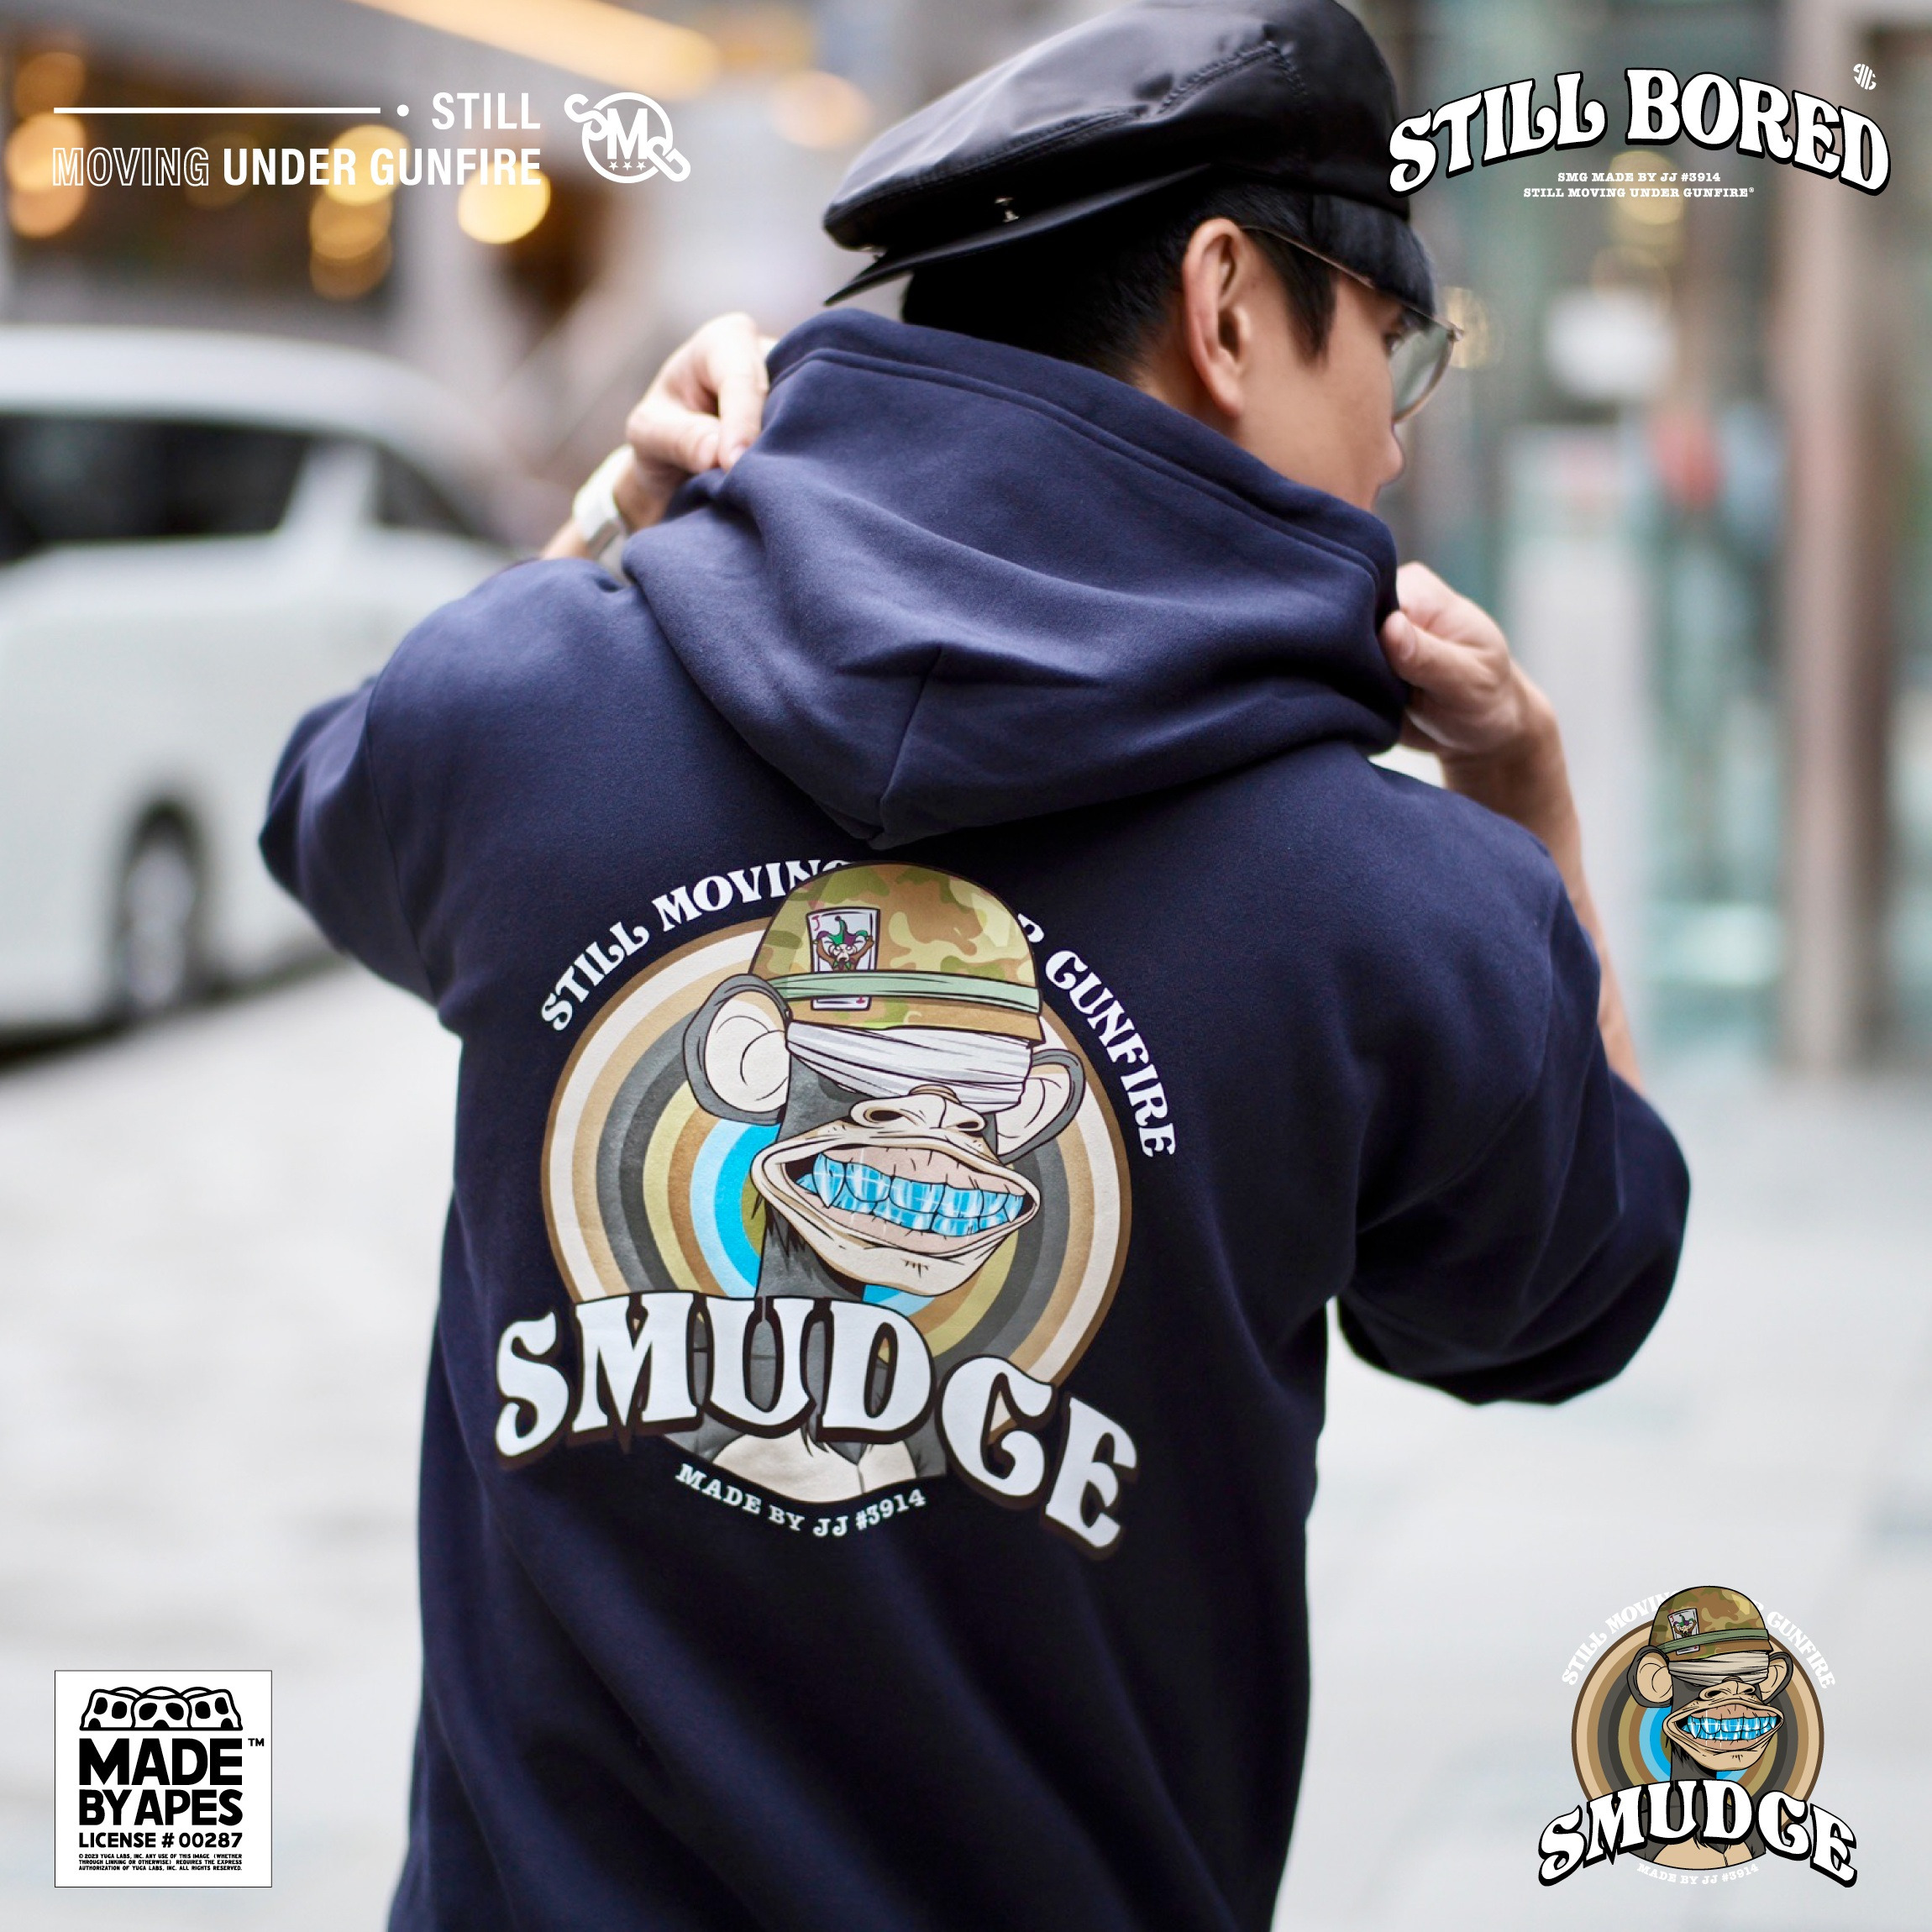 [SMG JJ STYLE ] 327- BAYC #3914 MADE BY APES “Still Bored” Limited Collection